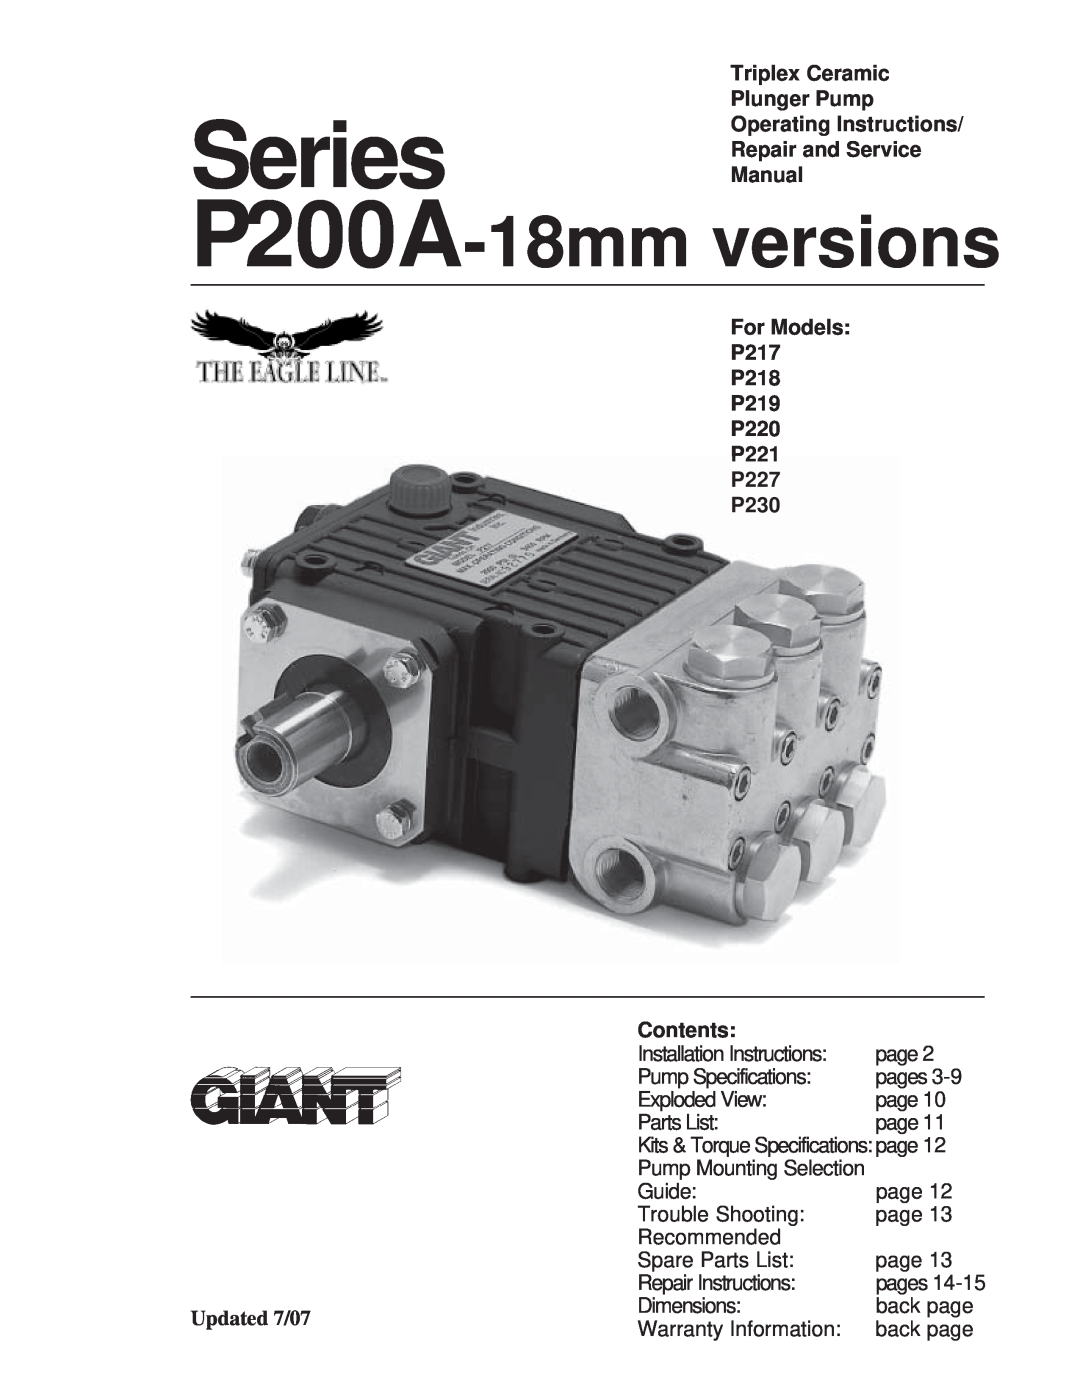 Giant P220, P219 service manual Updated 6/00, Triplex Ceramic Plunger Pump Operating Instructions, Contents, Series P200A 